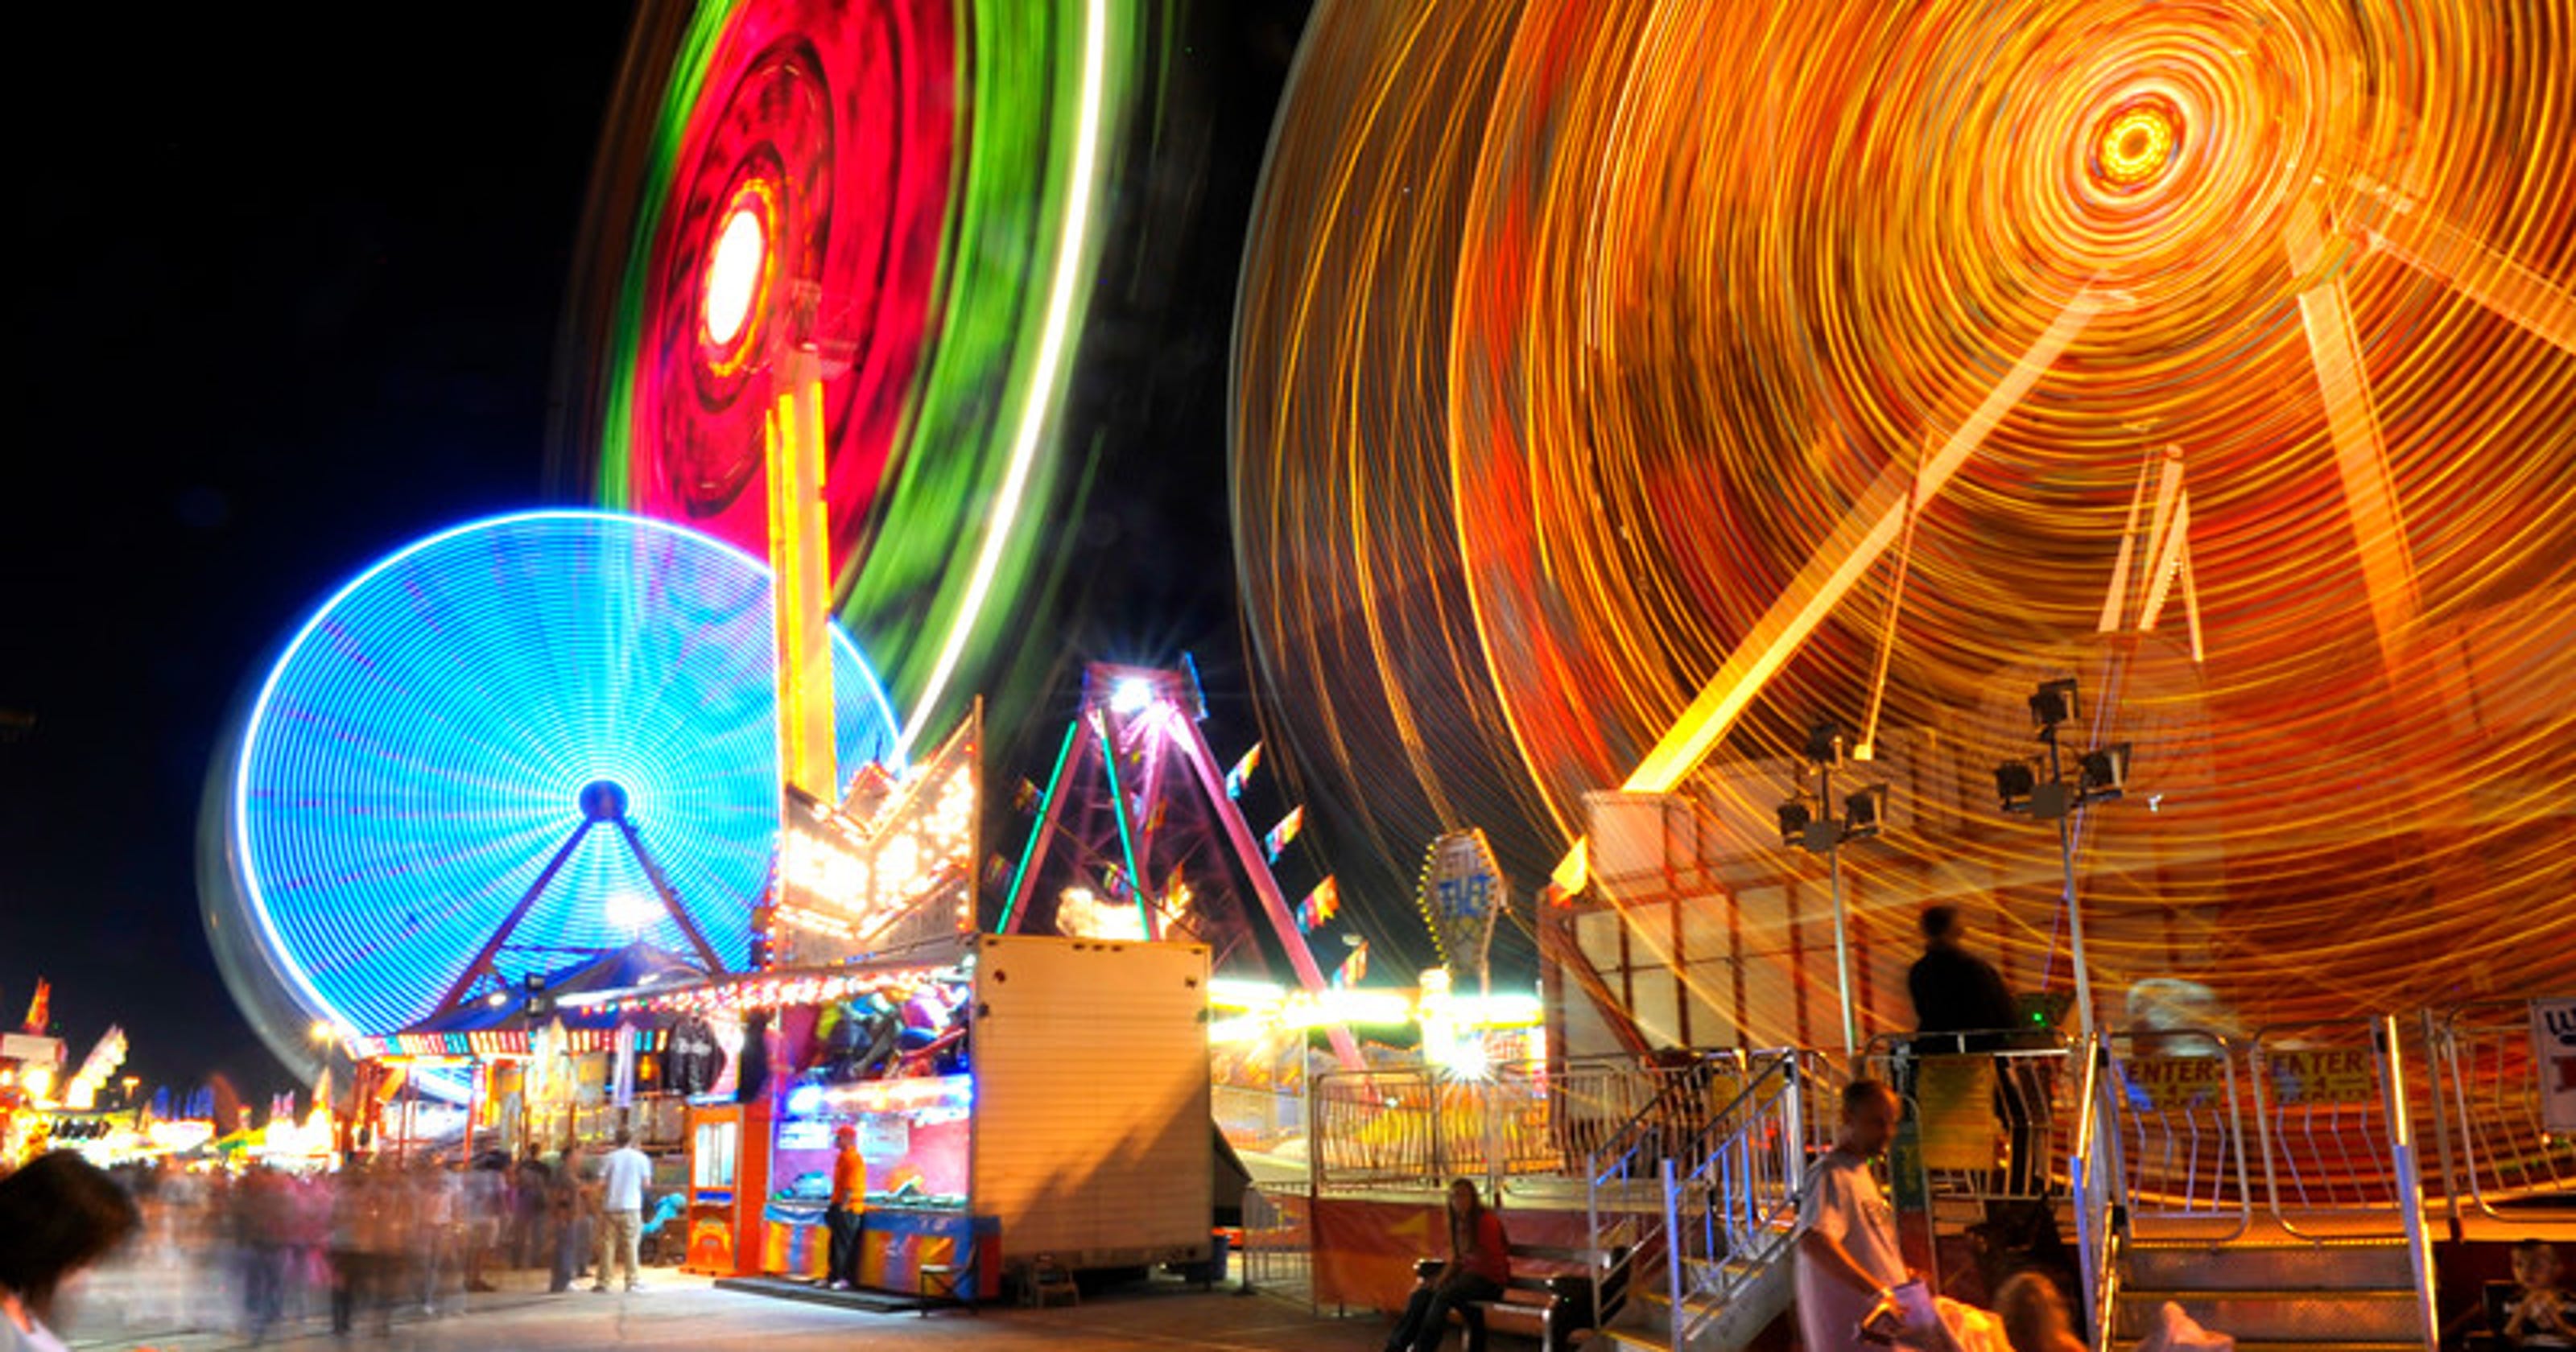 York Fair 2018: A guide to tickets, discounts, schedules and more